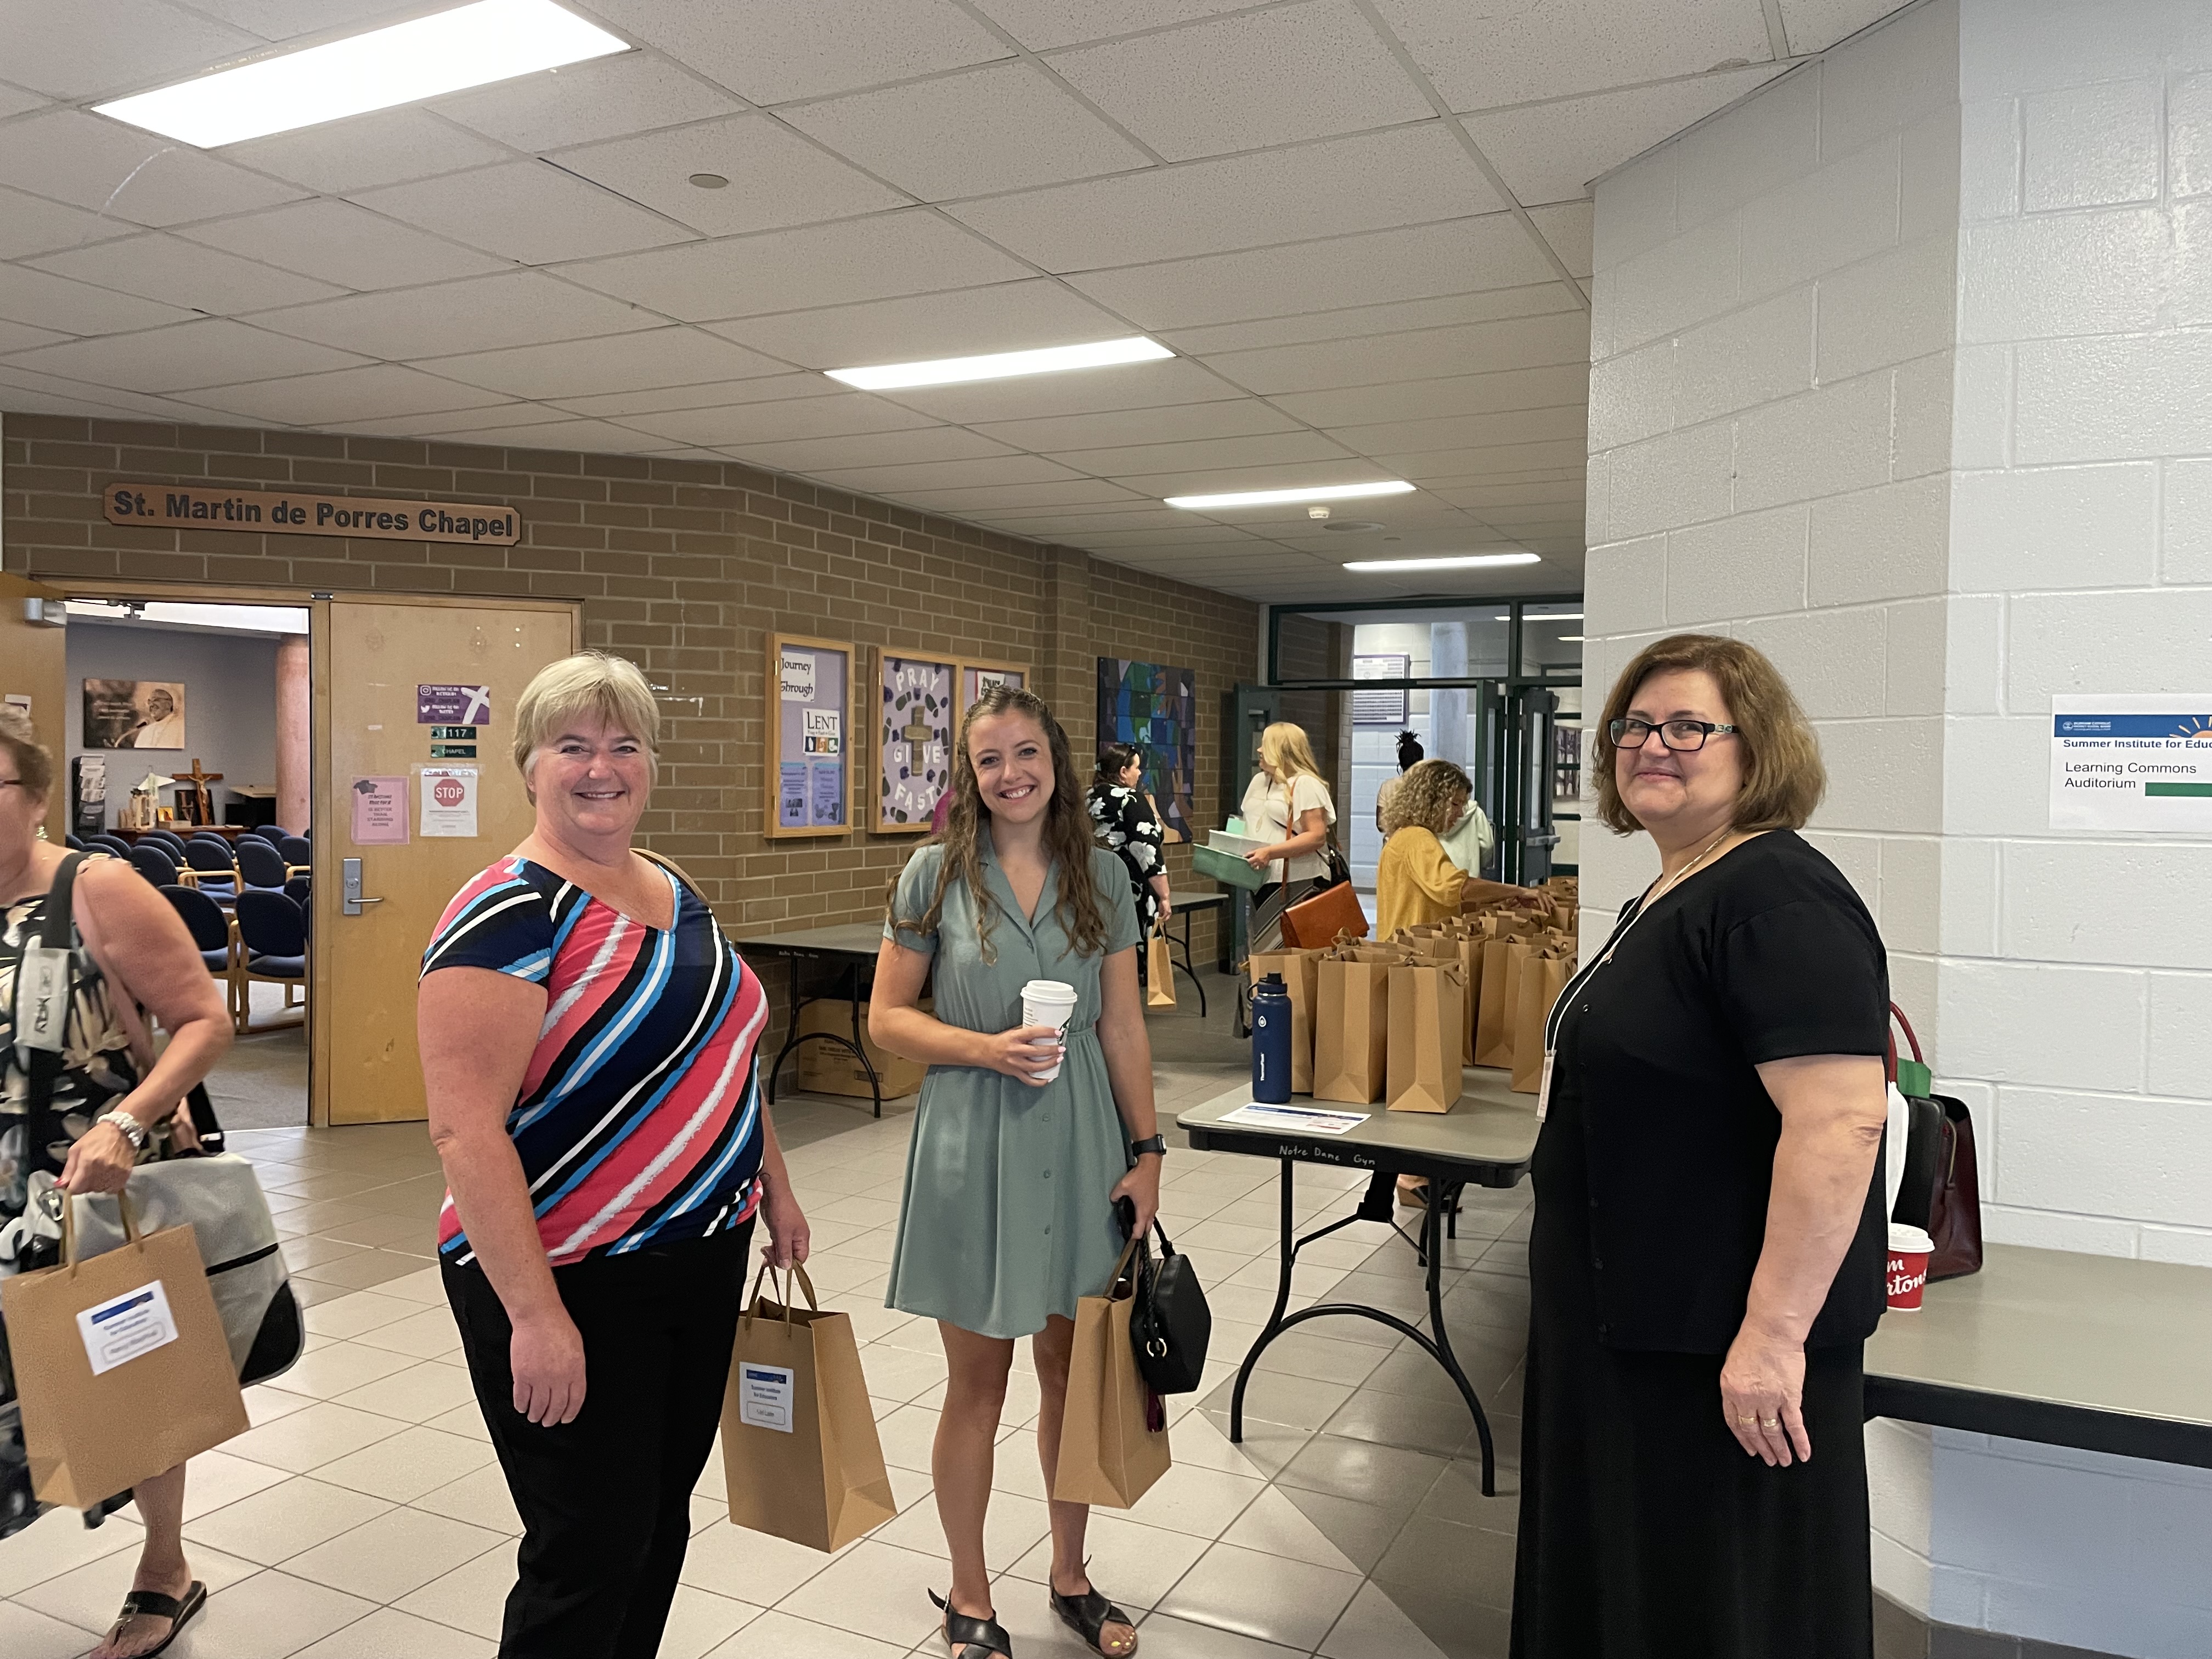 Three female staff members arriving for the Summer Institute for Educators session